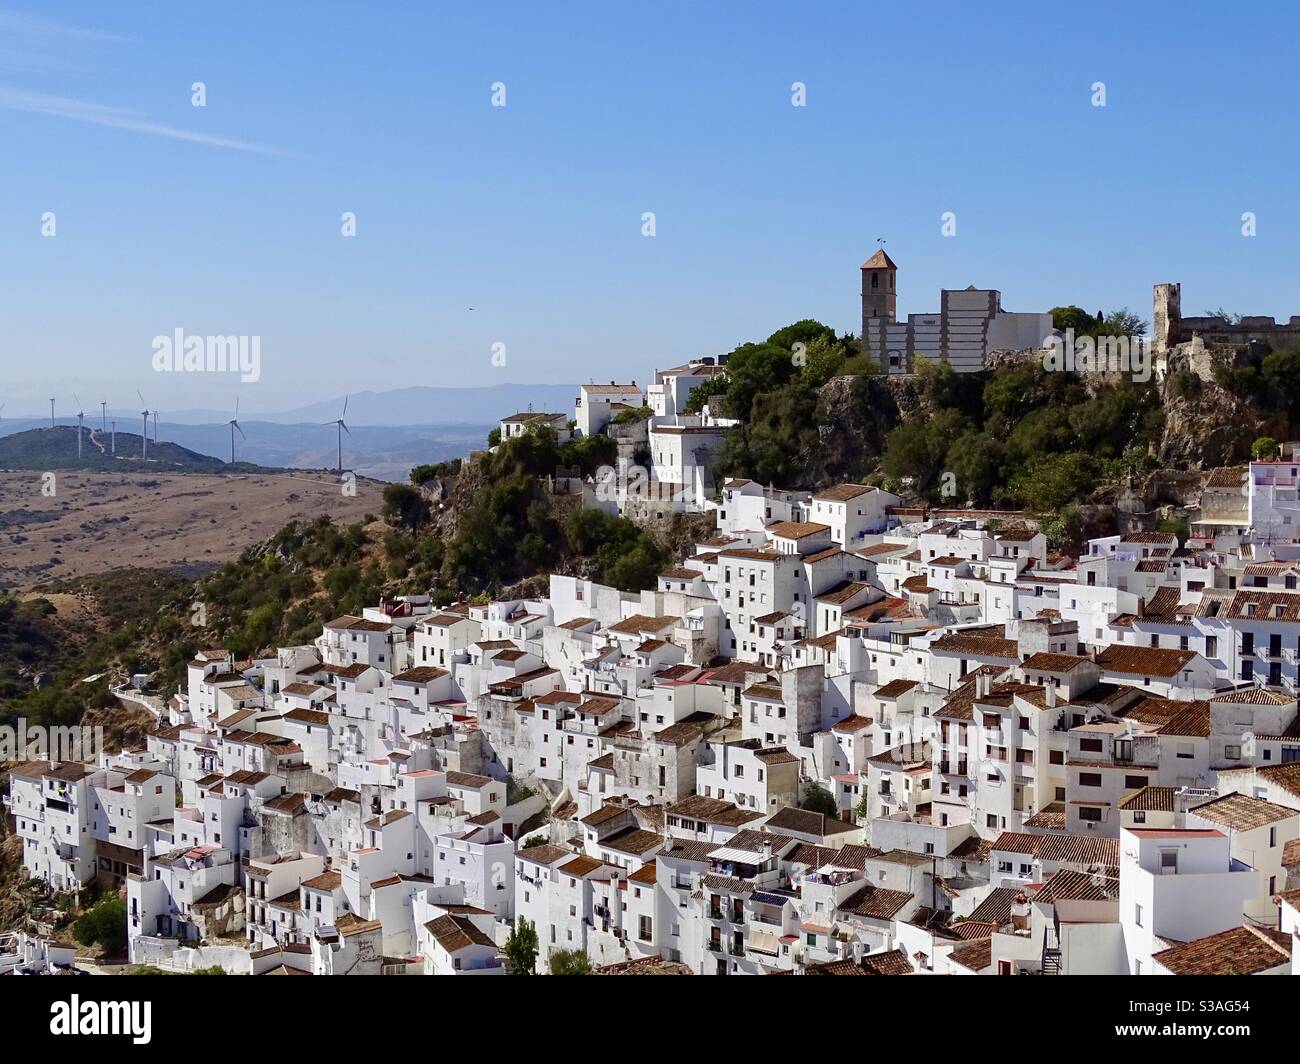 Panoramic view of the traditional white village of Casares in southern Spain Stock Photo